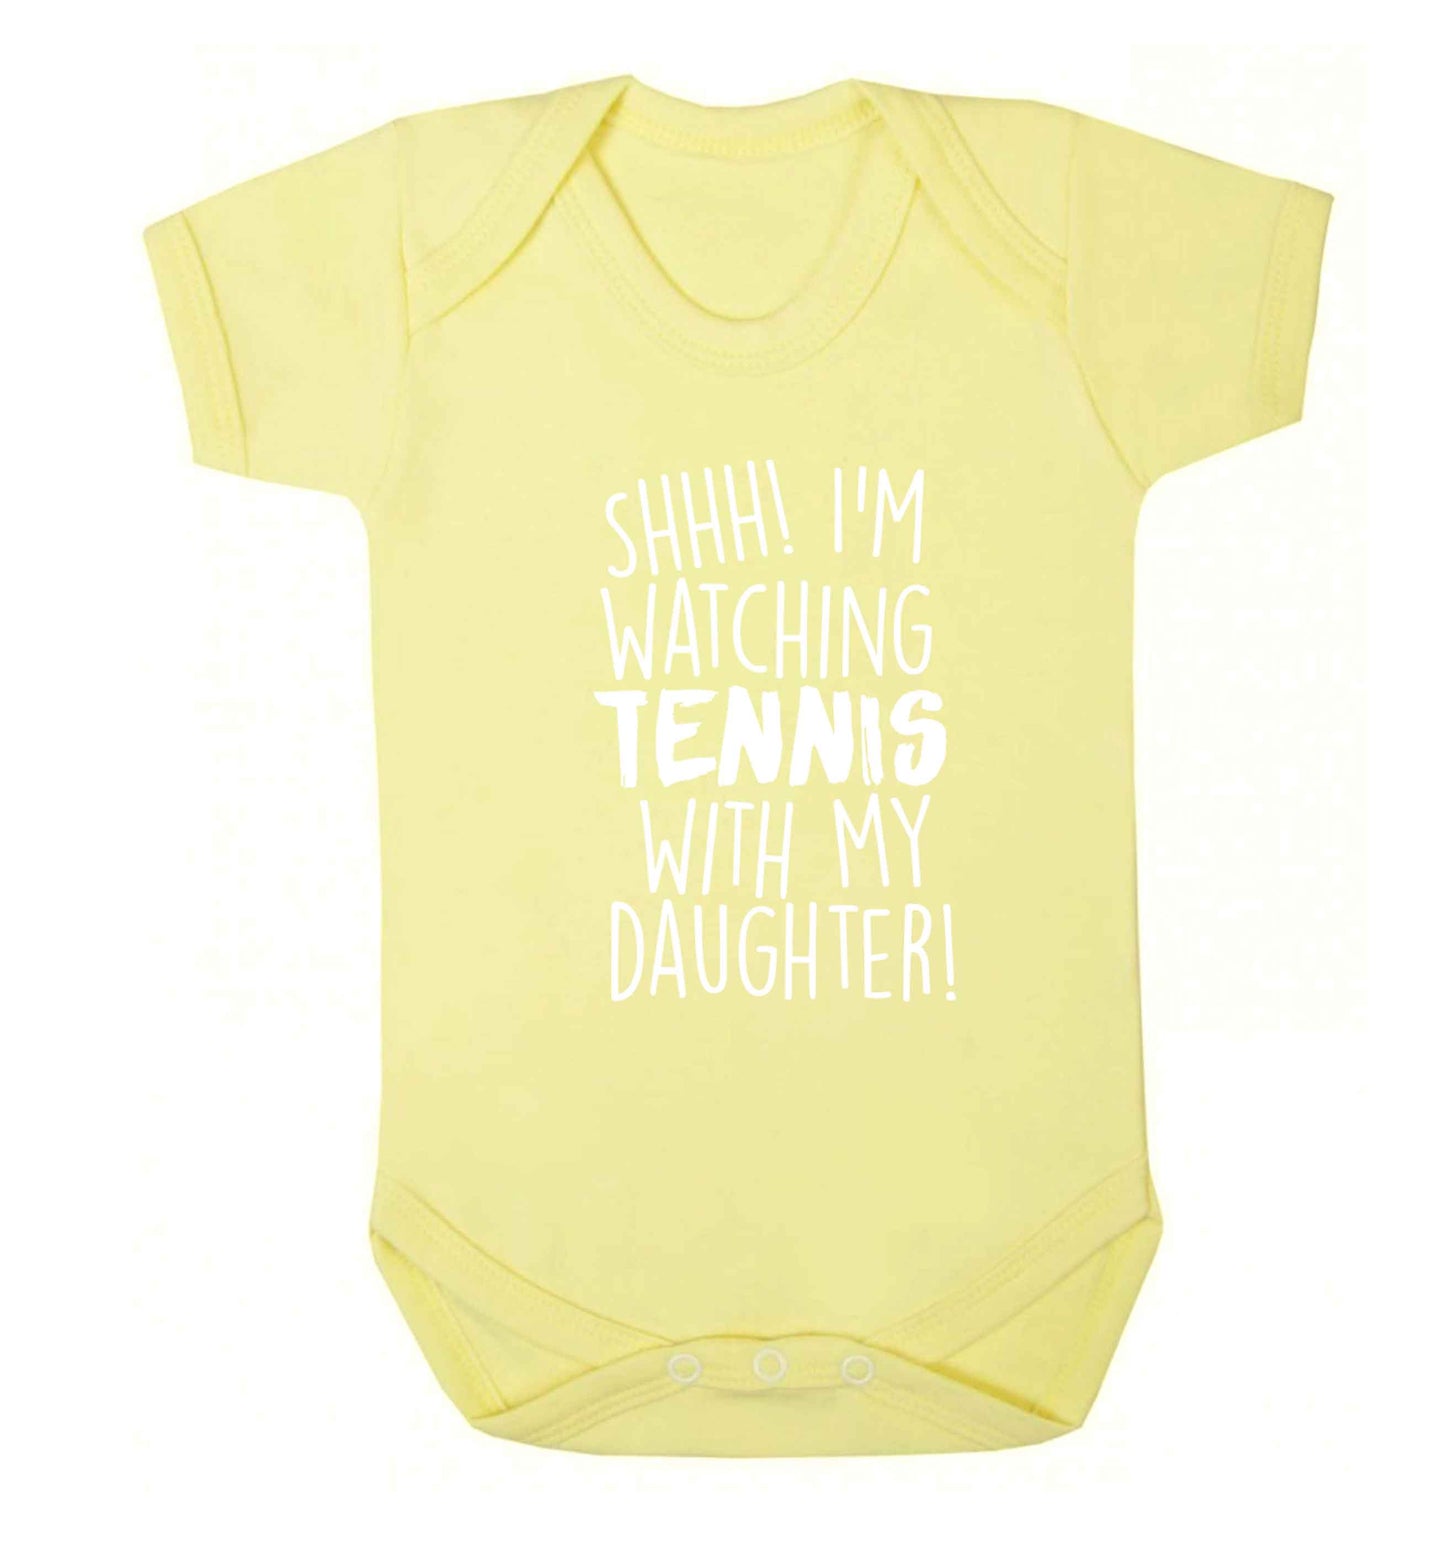 Shh! I'm watching tennis with my daughter! Baby Vest pale yellow 18-24 months